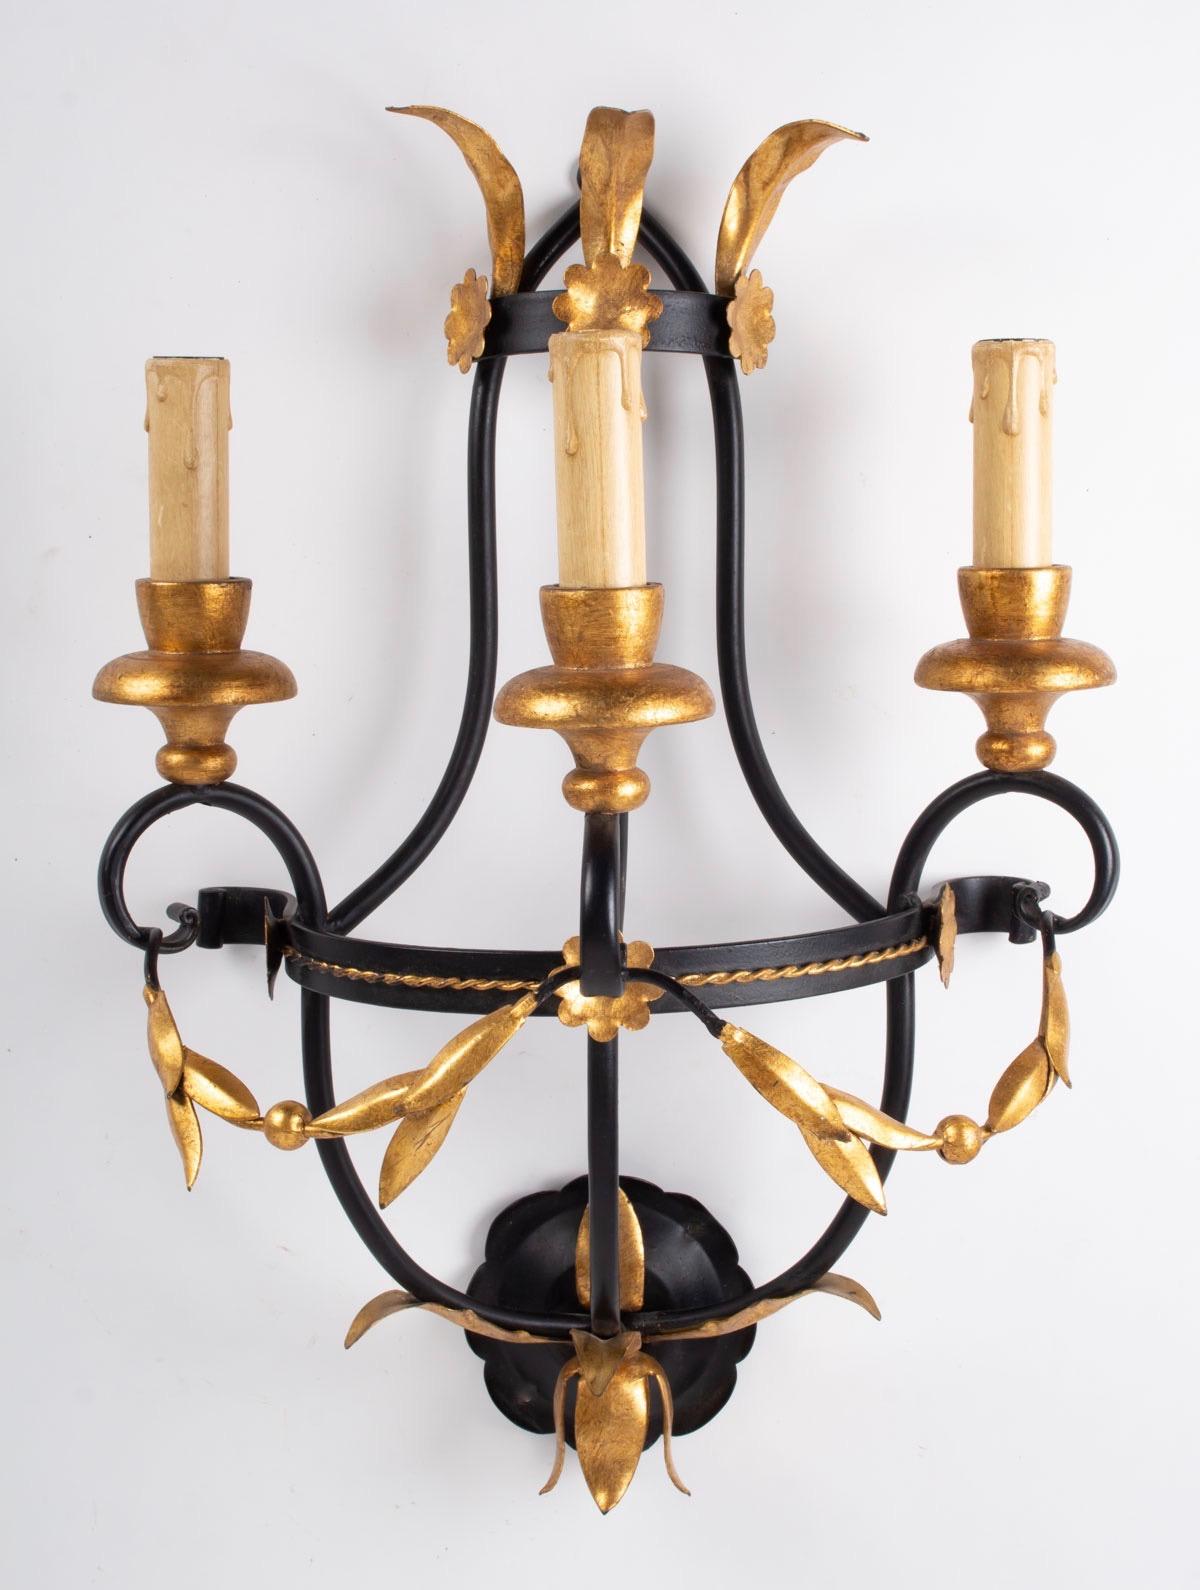 1960s set of 3 Maison Honore neoclassical sconces

The sconces structure is made of black lacquered steel stem. 
The 3 lighted arms are adorned with gilded leaves flowers and cups.